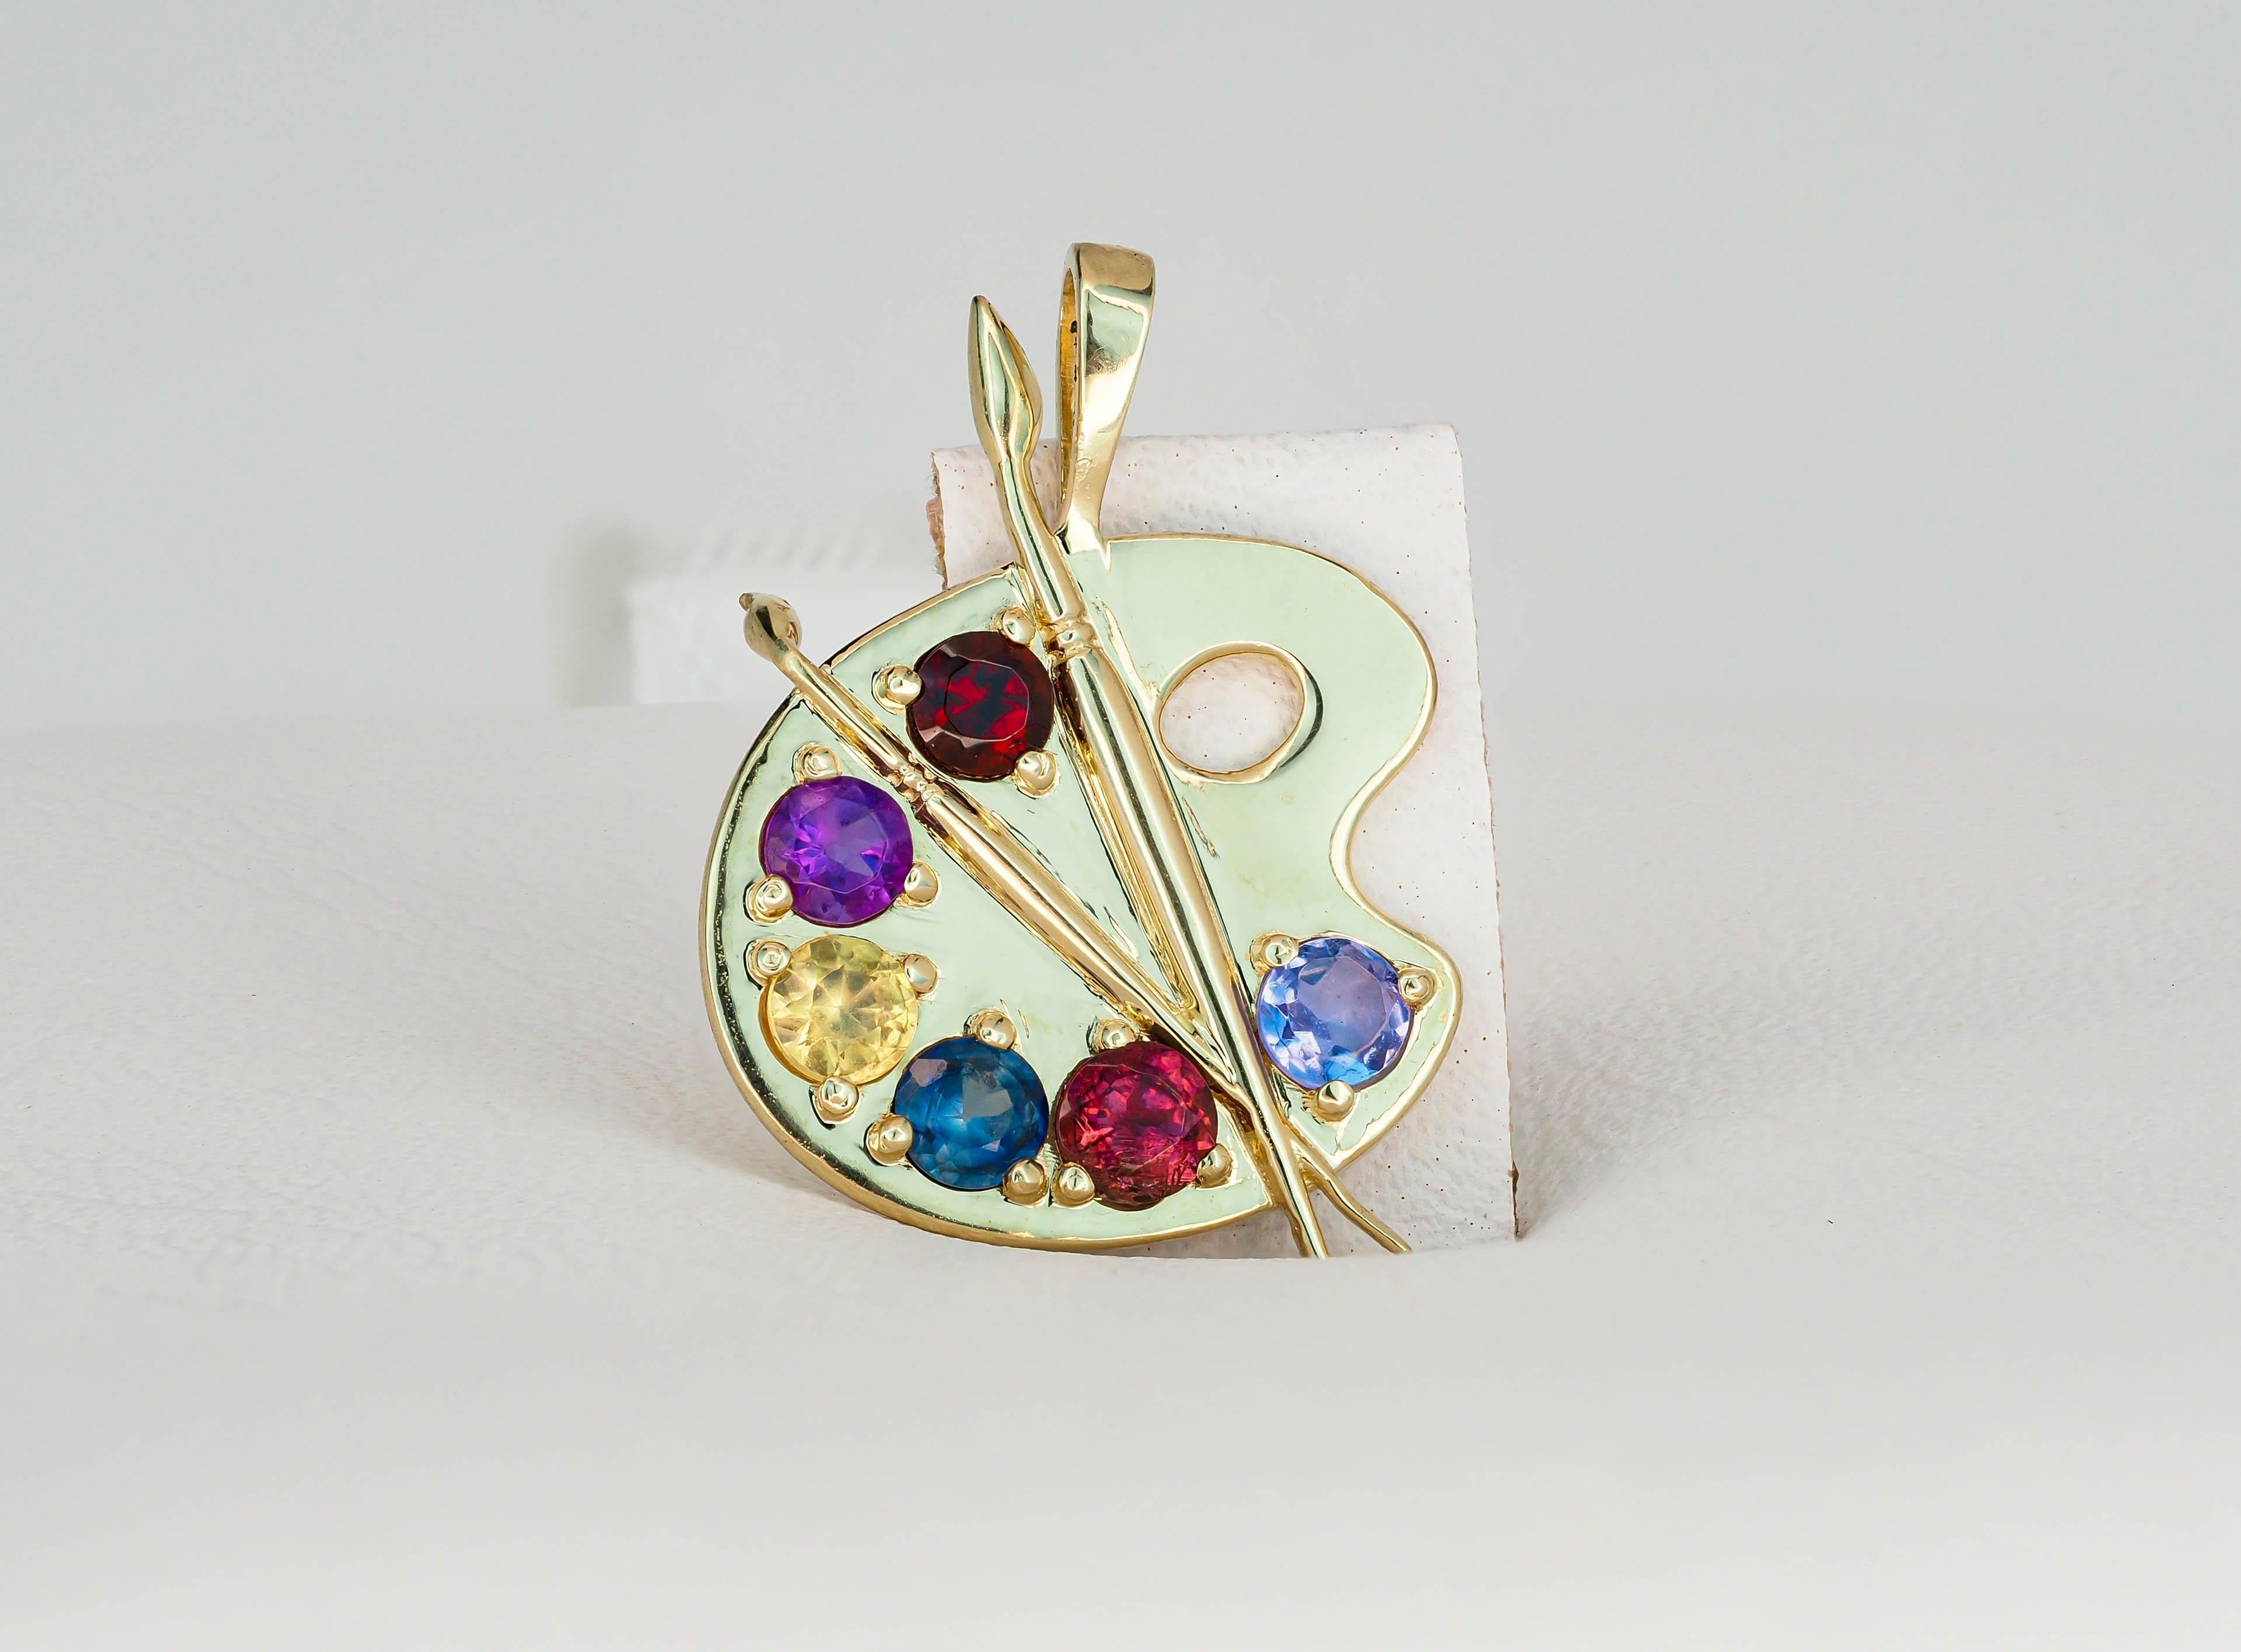 Palette with paints 14 kt solid gold pendant with colored stones.
14 kt solid yellow gold
Size: 17.6 x 18 mm.
Total weight 1.61 g.

Natural gemstones:
Amethyst, sapphires, tanzanite, garnet - 6 stones
Round shape, colors - bluegreen, violet, red,